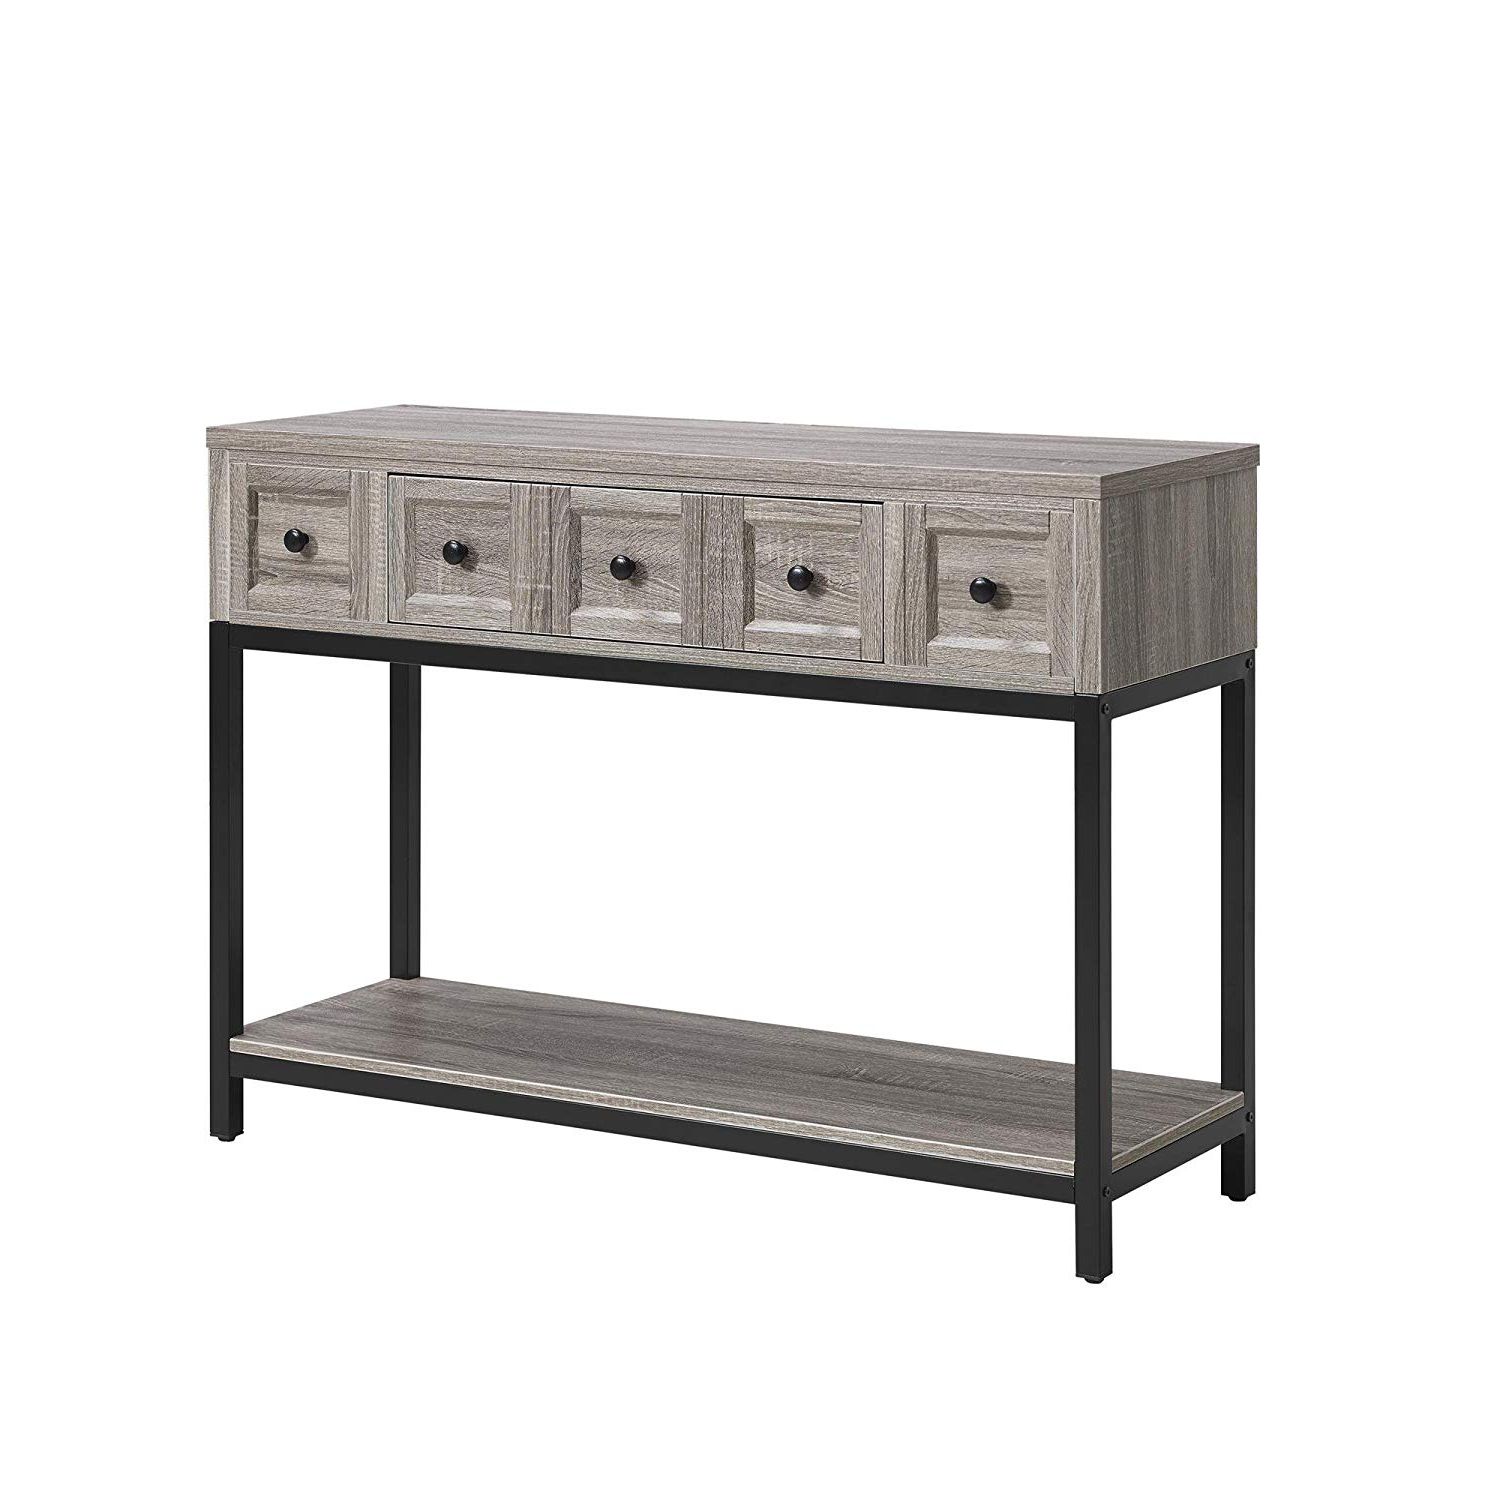 Newest Amazon: Altra Furniture Console Table In Sonoma Oak Finish With Regard To Parsons Grey Marble Top & Dark Steel Base 48x16 Console Tables (View 4 of 20)